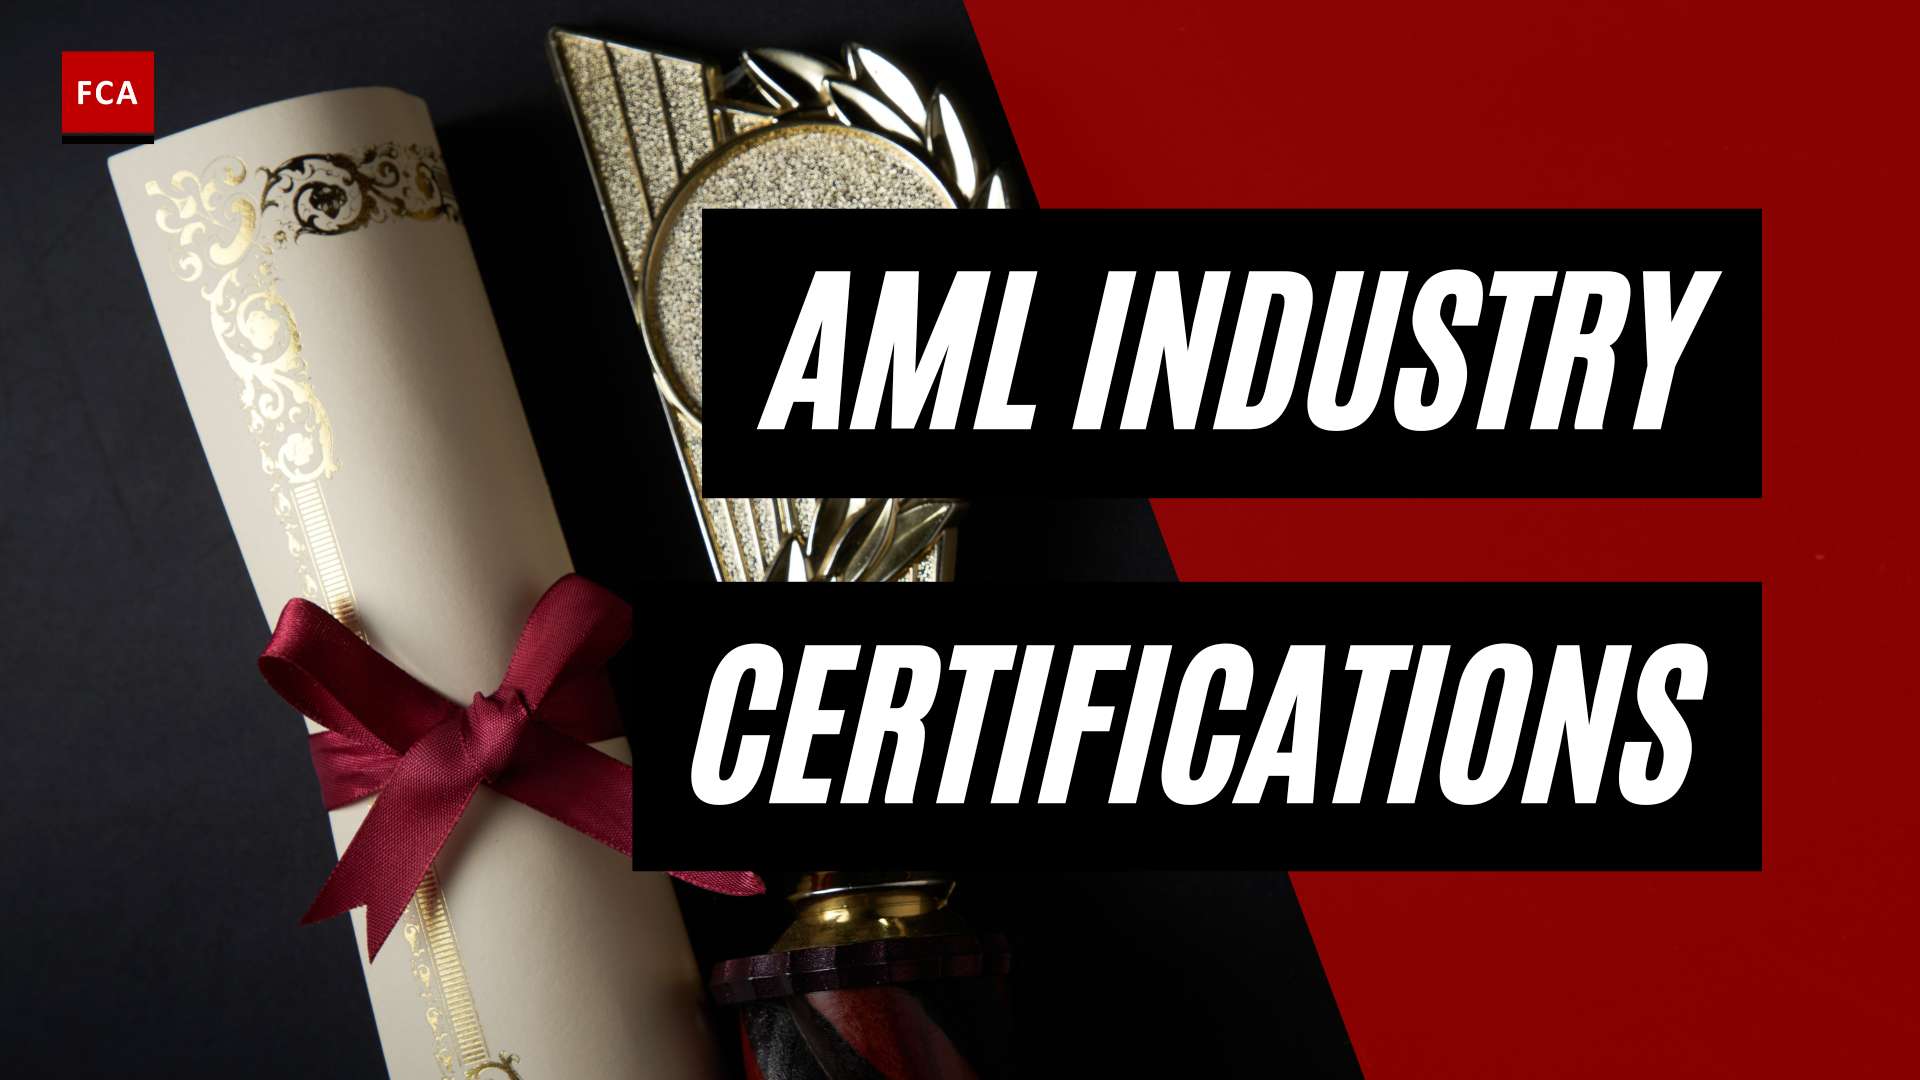 Accelerate Your Aml Career: The Key To Aml Industry Certifications